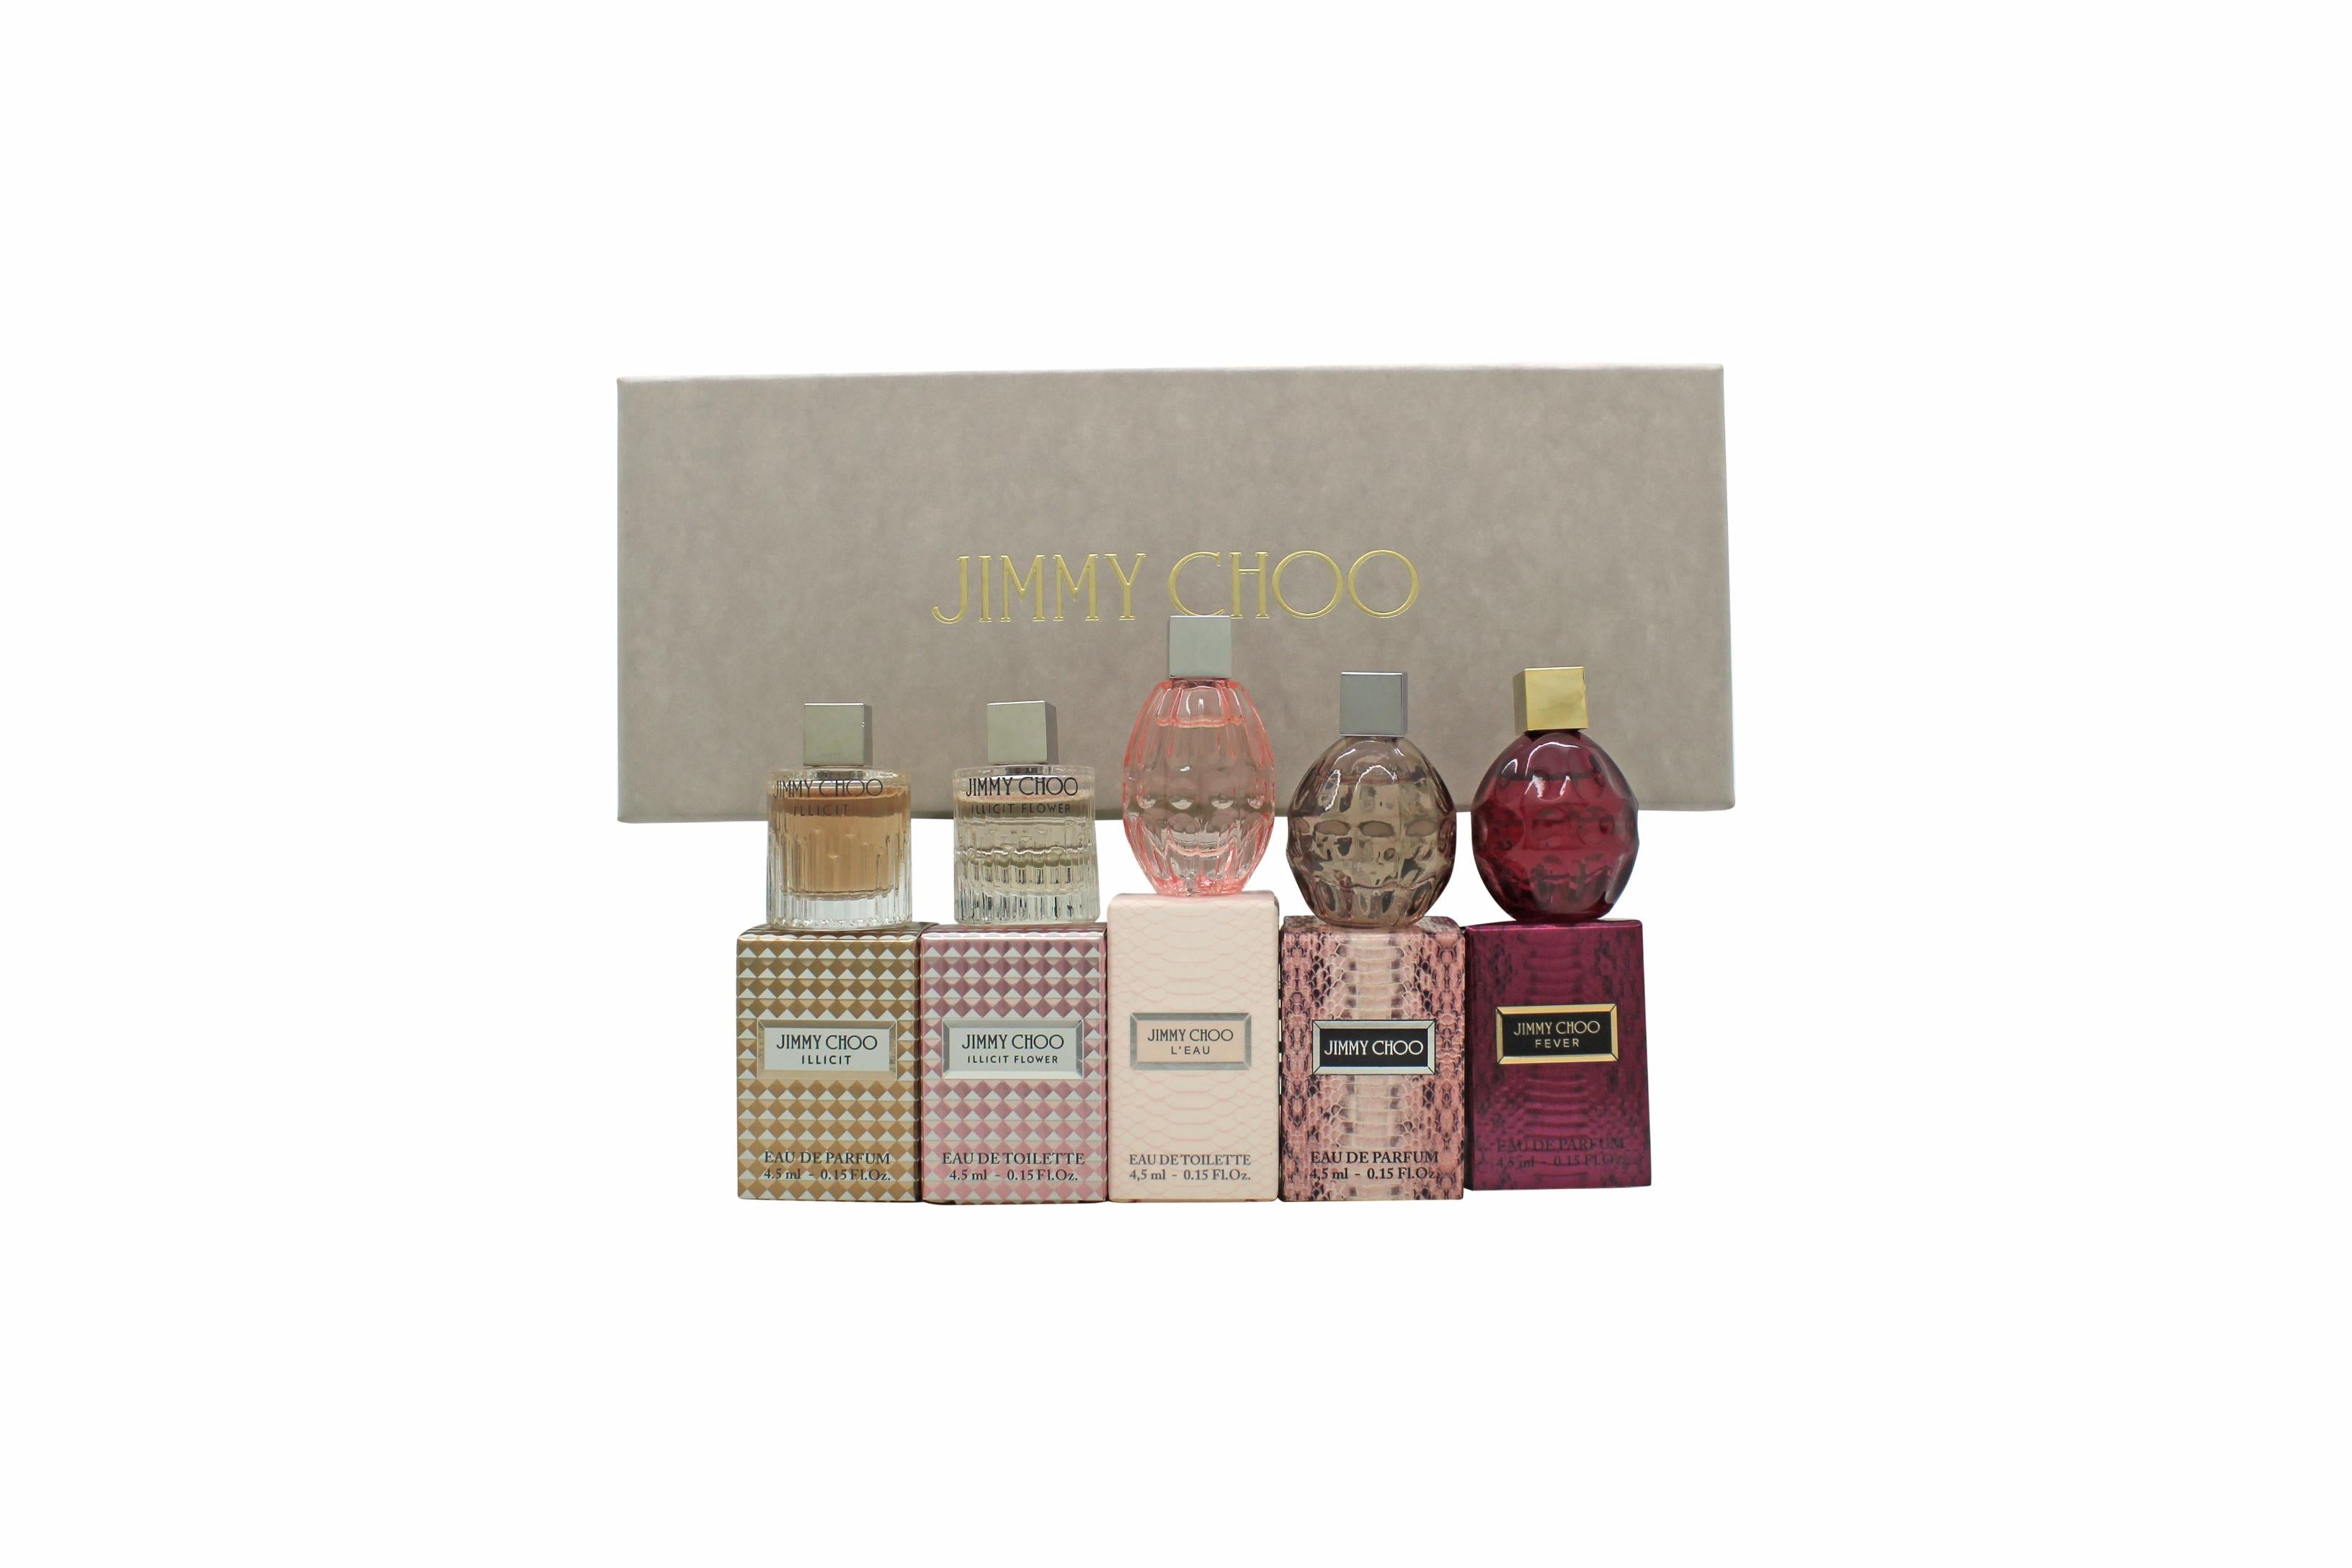 View Jimmy Choo Miniature Gift Set 5 Pieces information